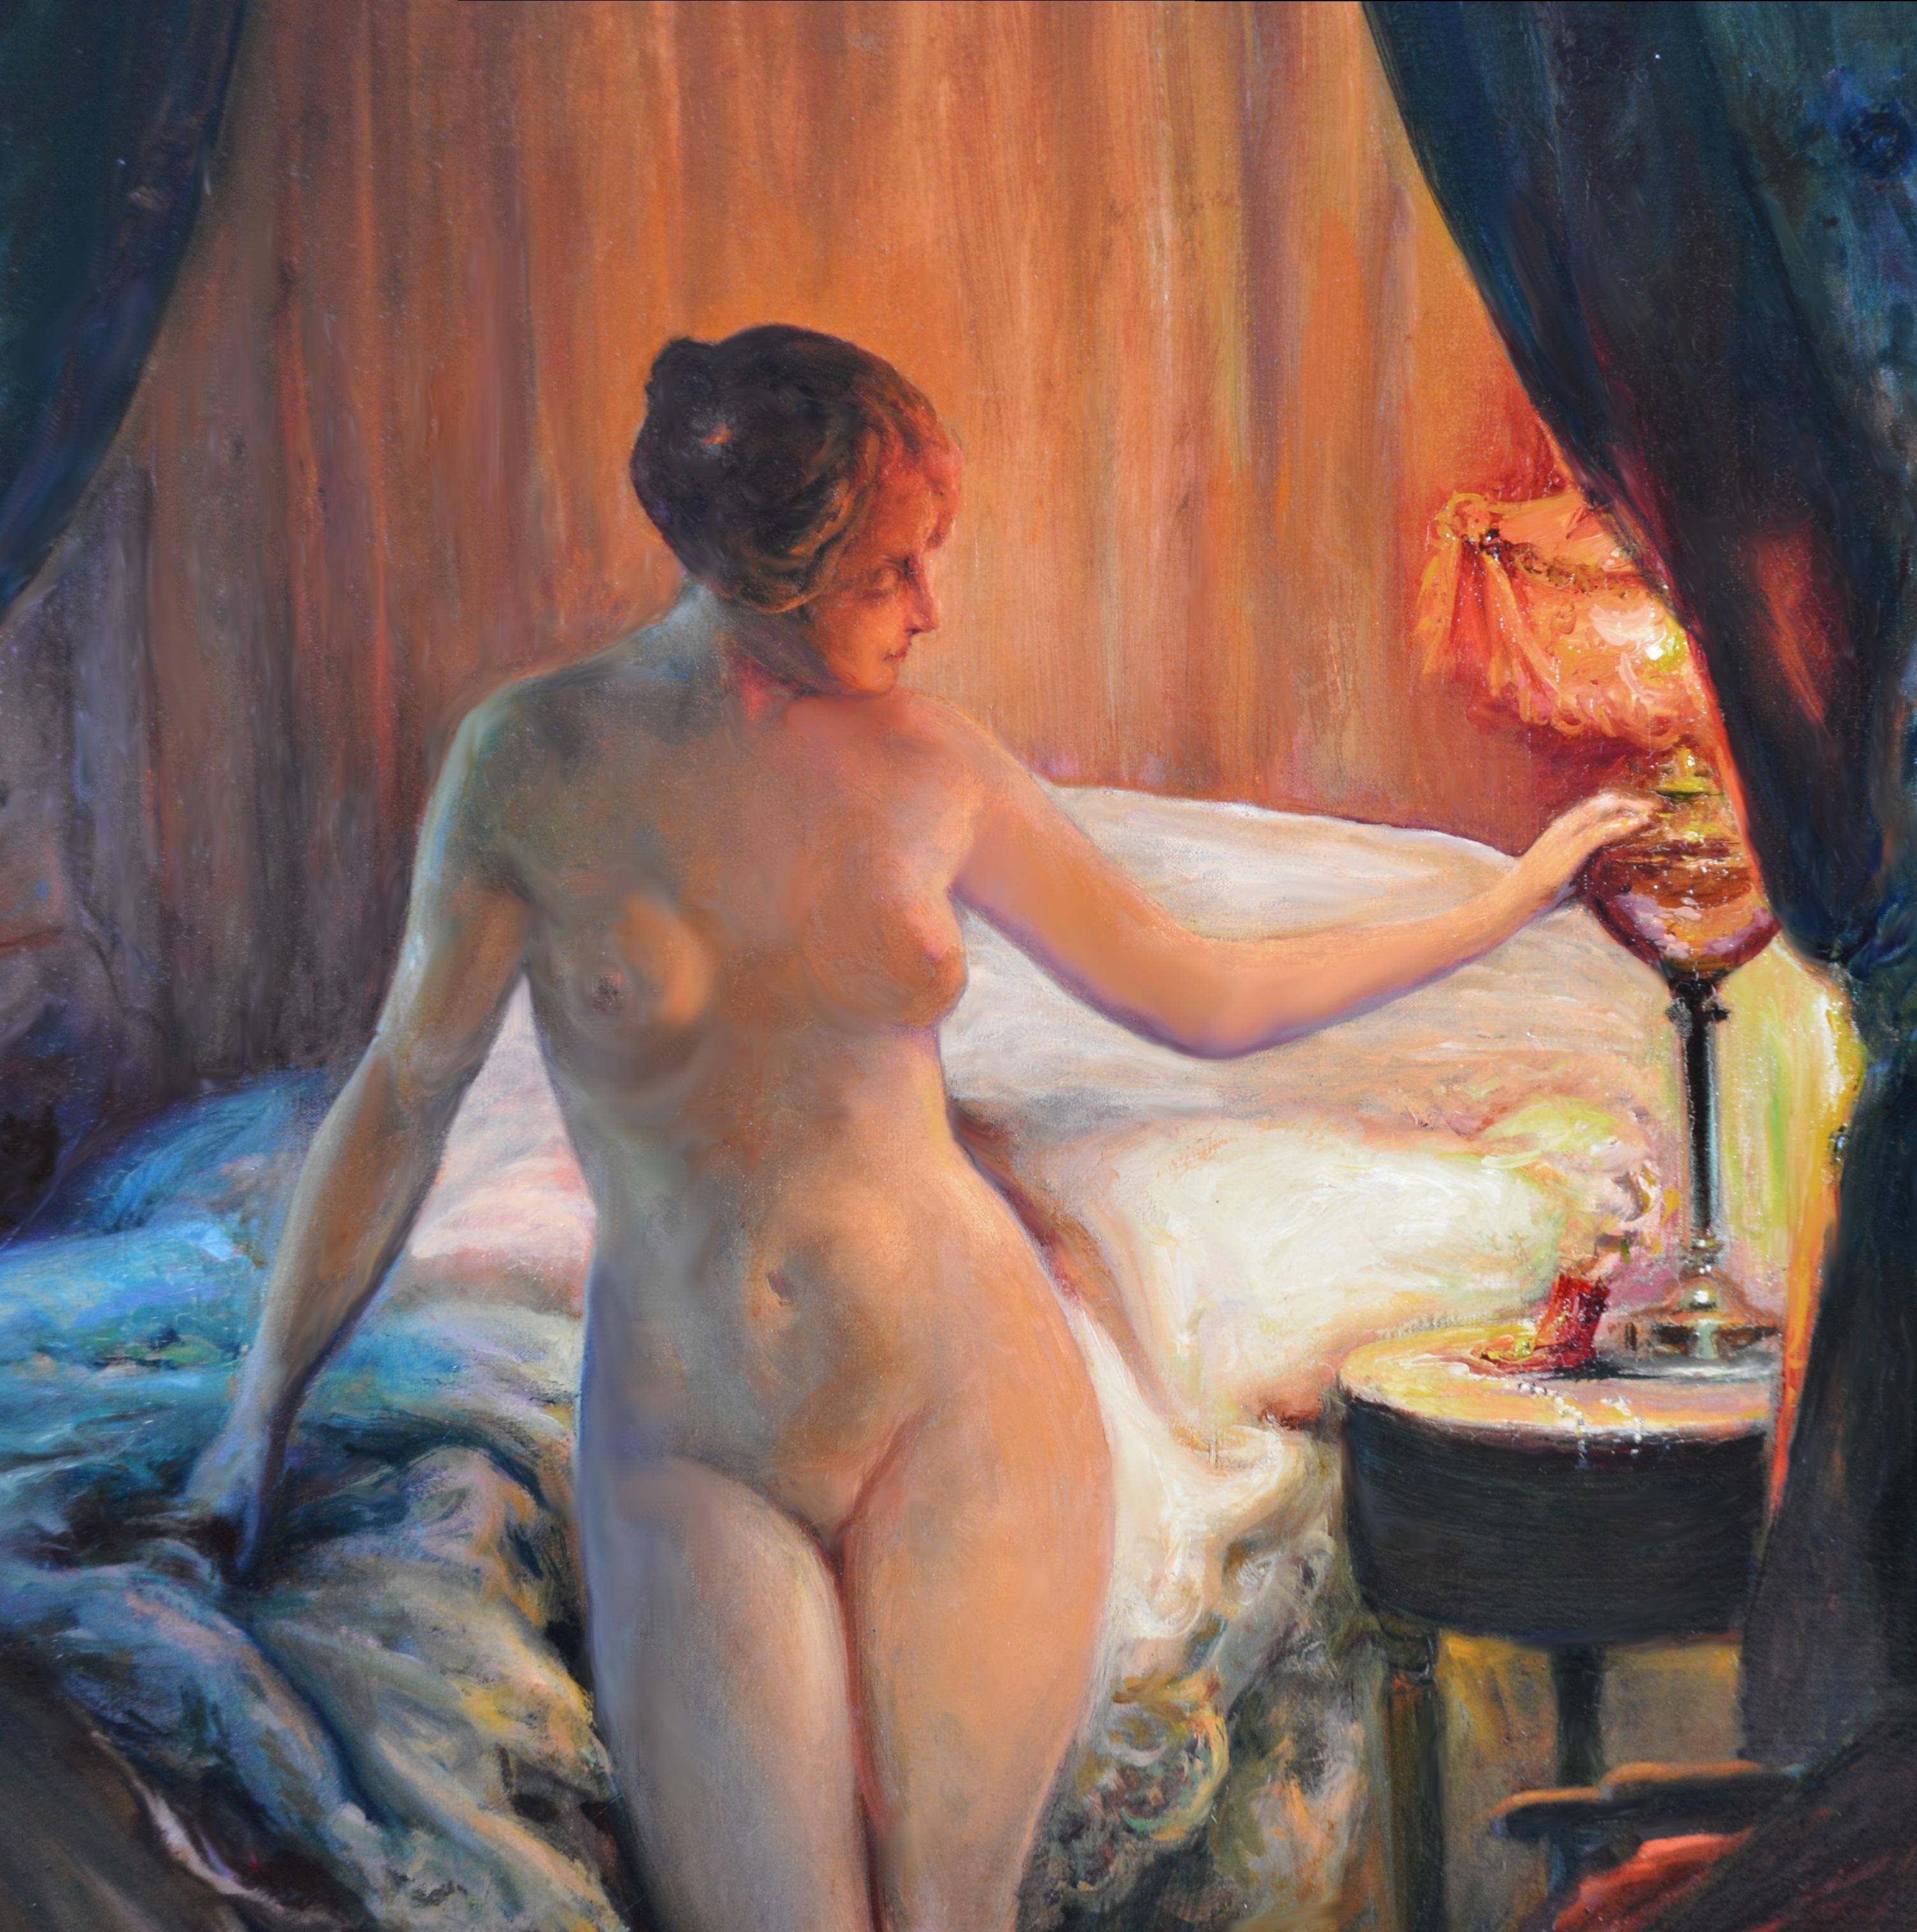 'A l'Heure de se Coucher' by Émile Tabary (1857-1927). 

The painting – which depicts a Parisienne beauty in her boudoir lit by an Art Nouveau table lamp – is signed by the artist and further signed, dated 1924 and inscribed verso. The painting was